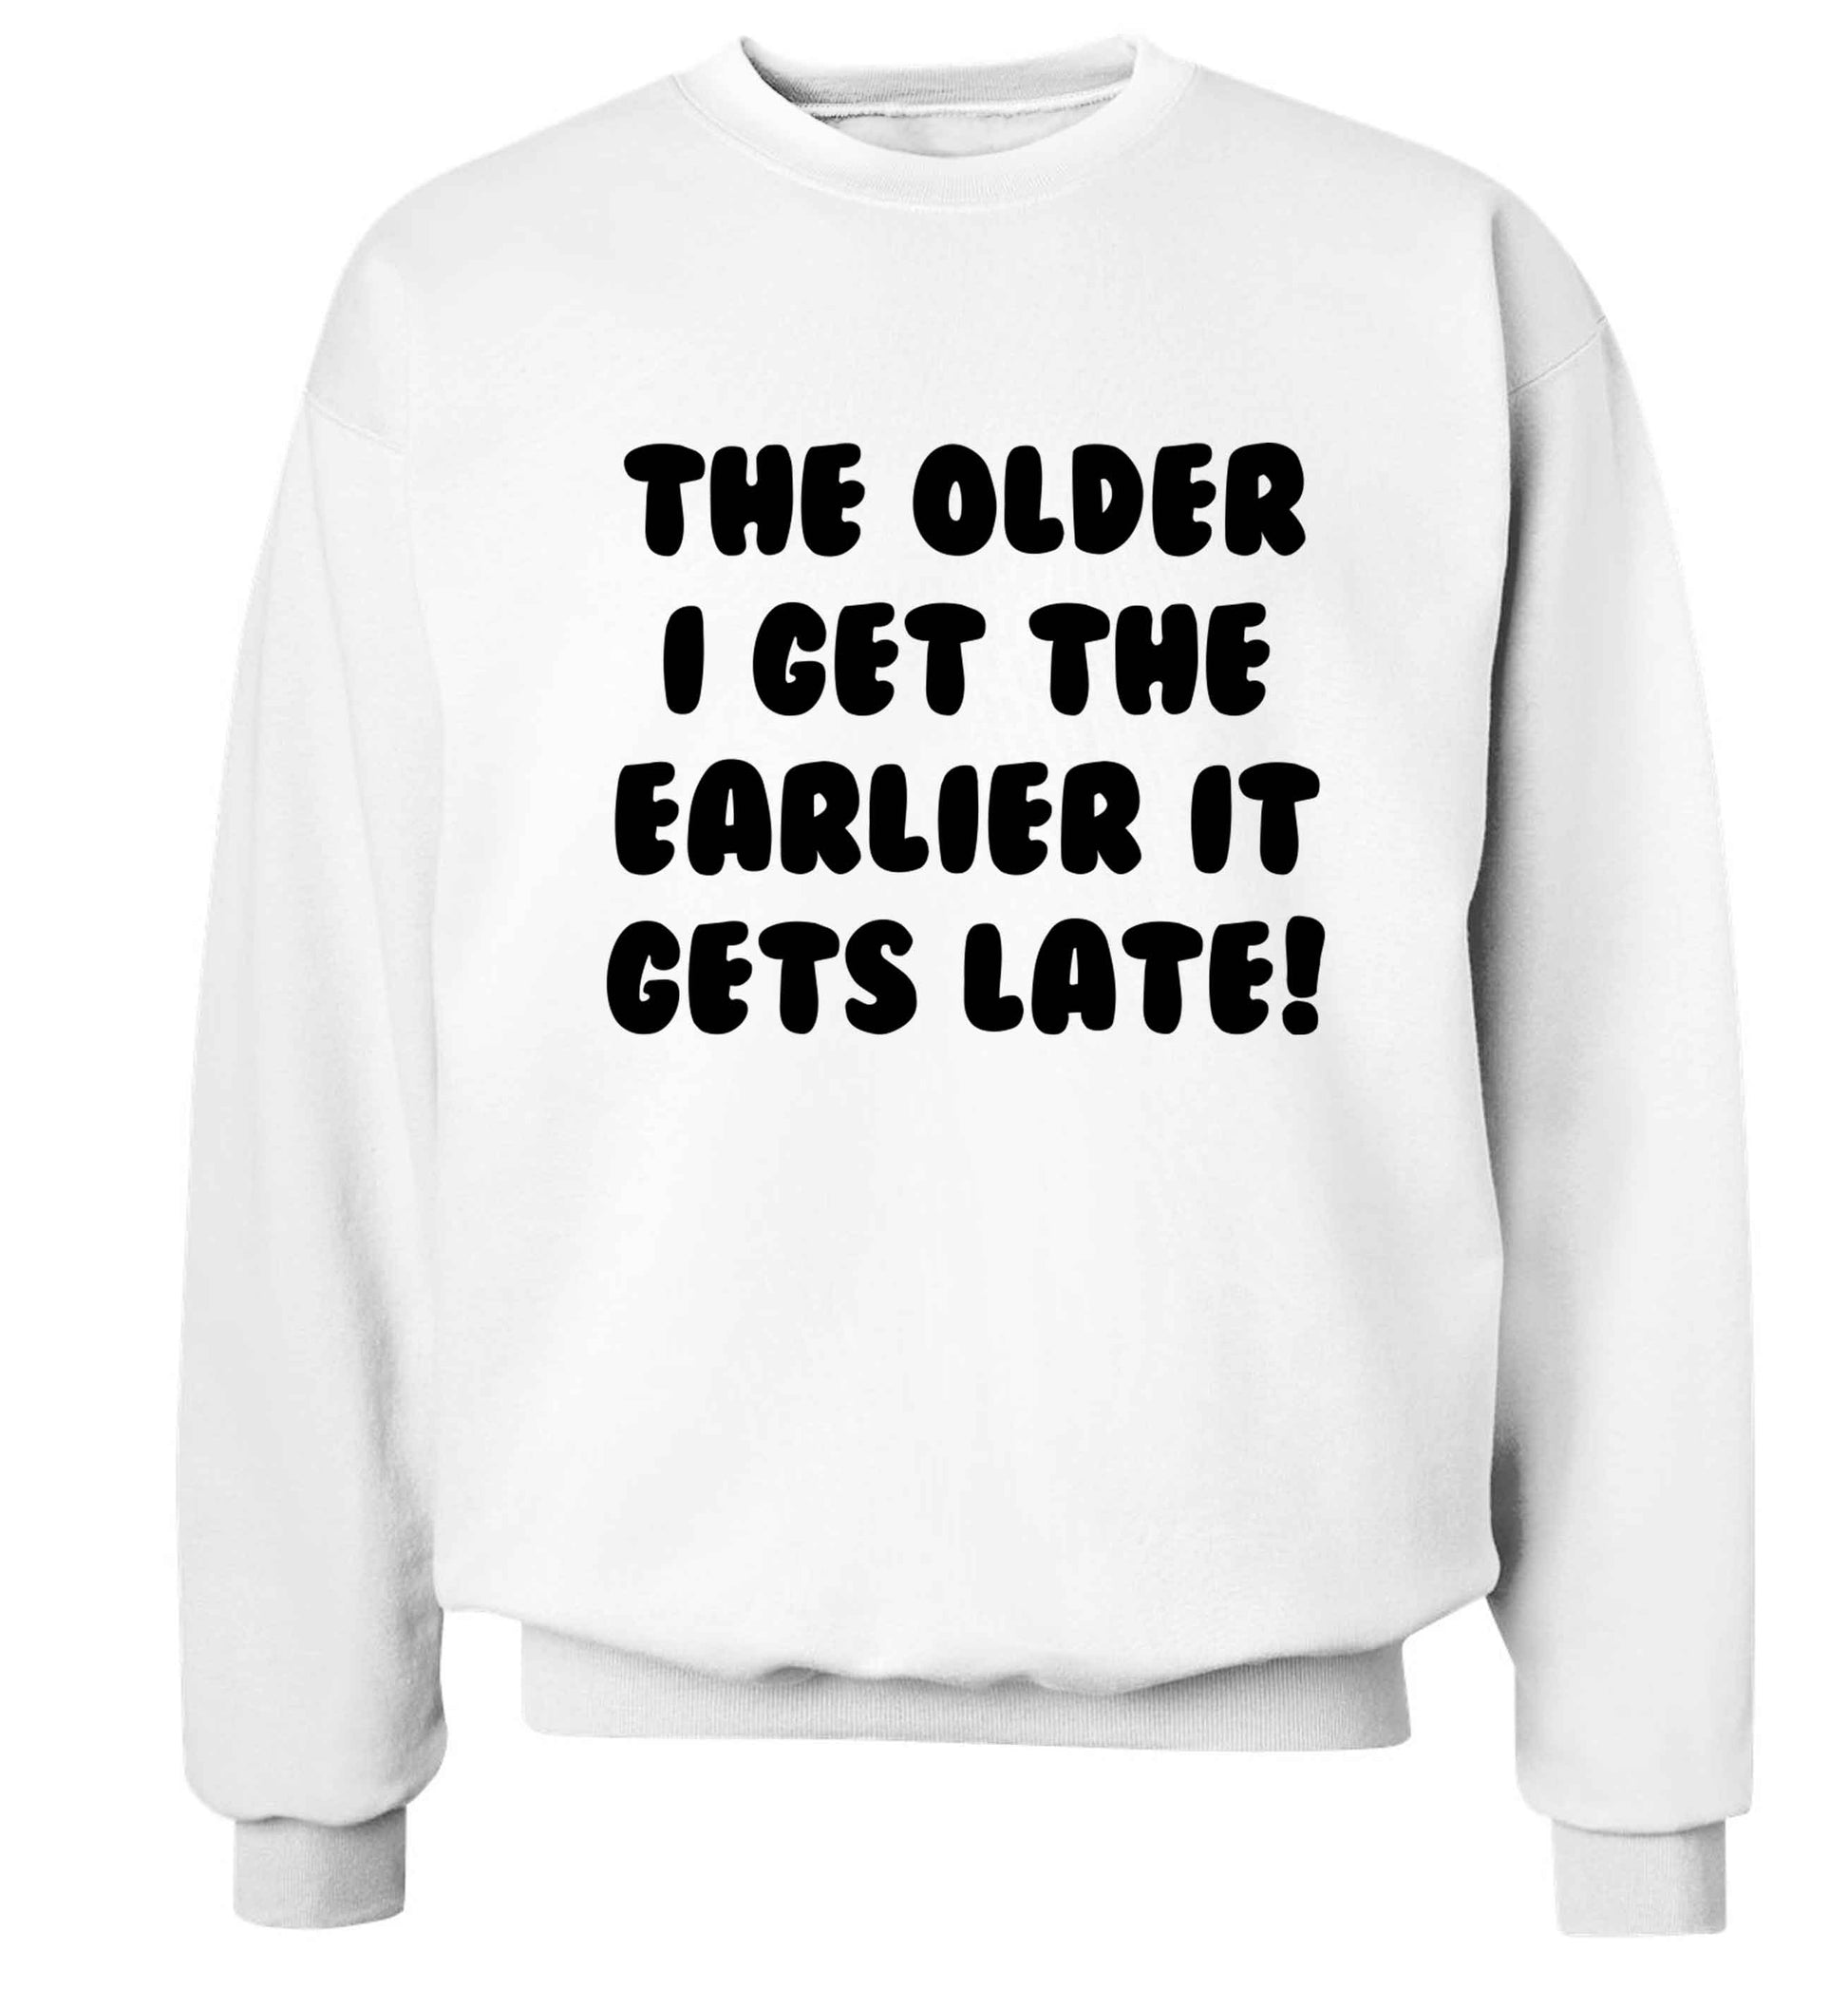 The older I get the earlier it gets late! Adult's unisex white Sweater 2XL